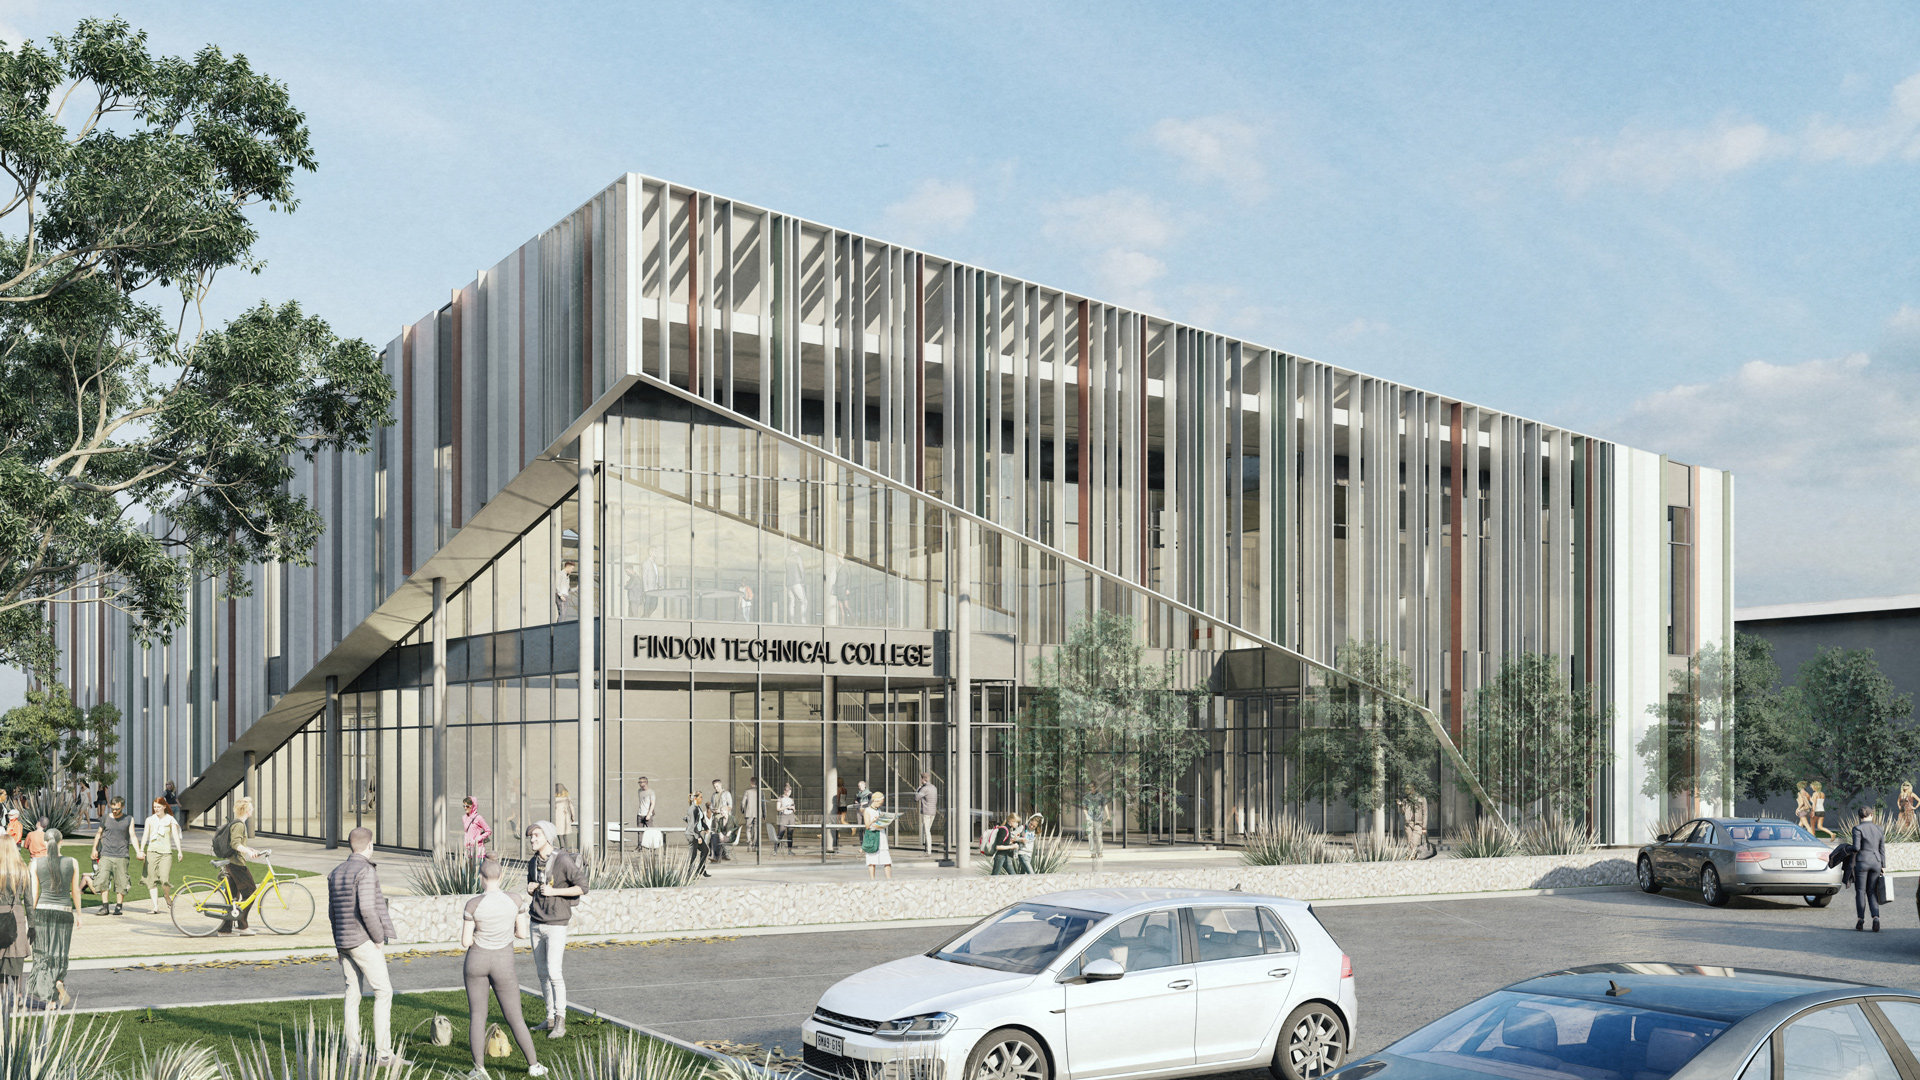 Artist impression of the Findon Technical College